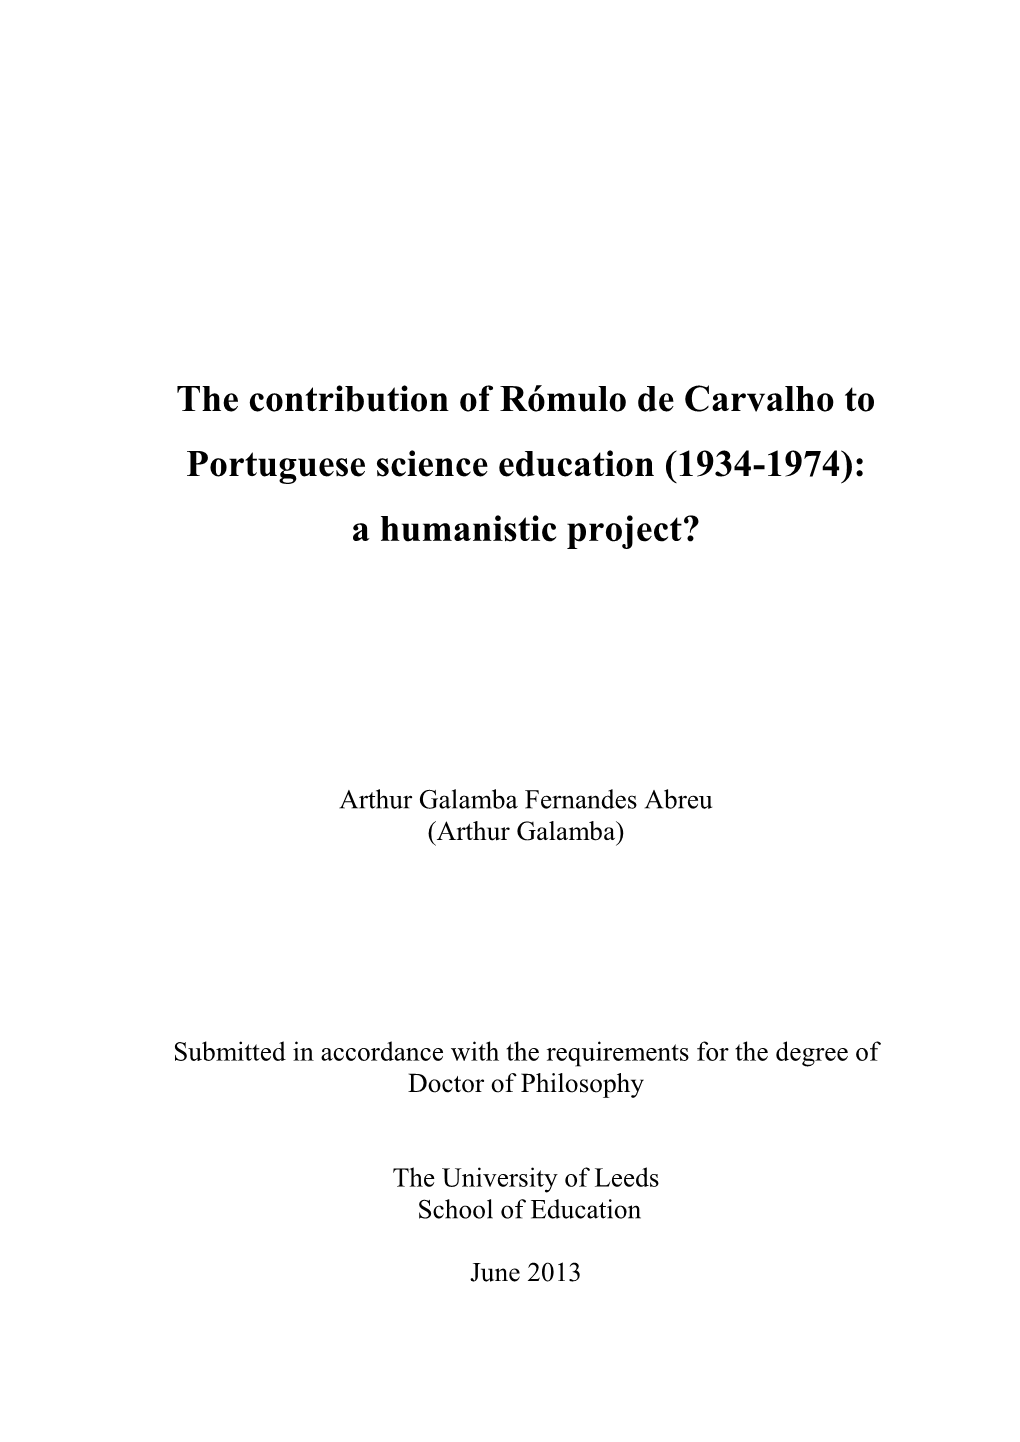 The Contribution of Rómulo De Carvalho to Portuguese Science Education (1934-1974): a Humanistic Project?